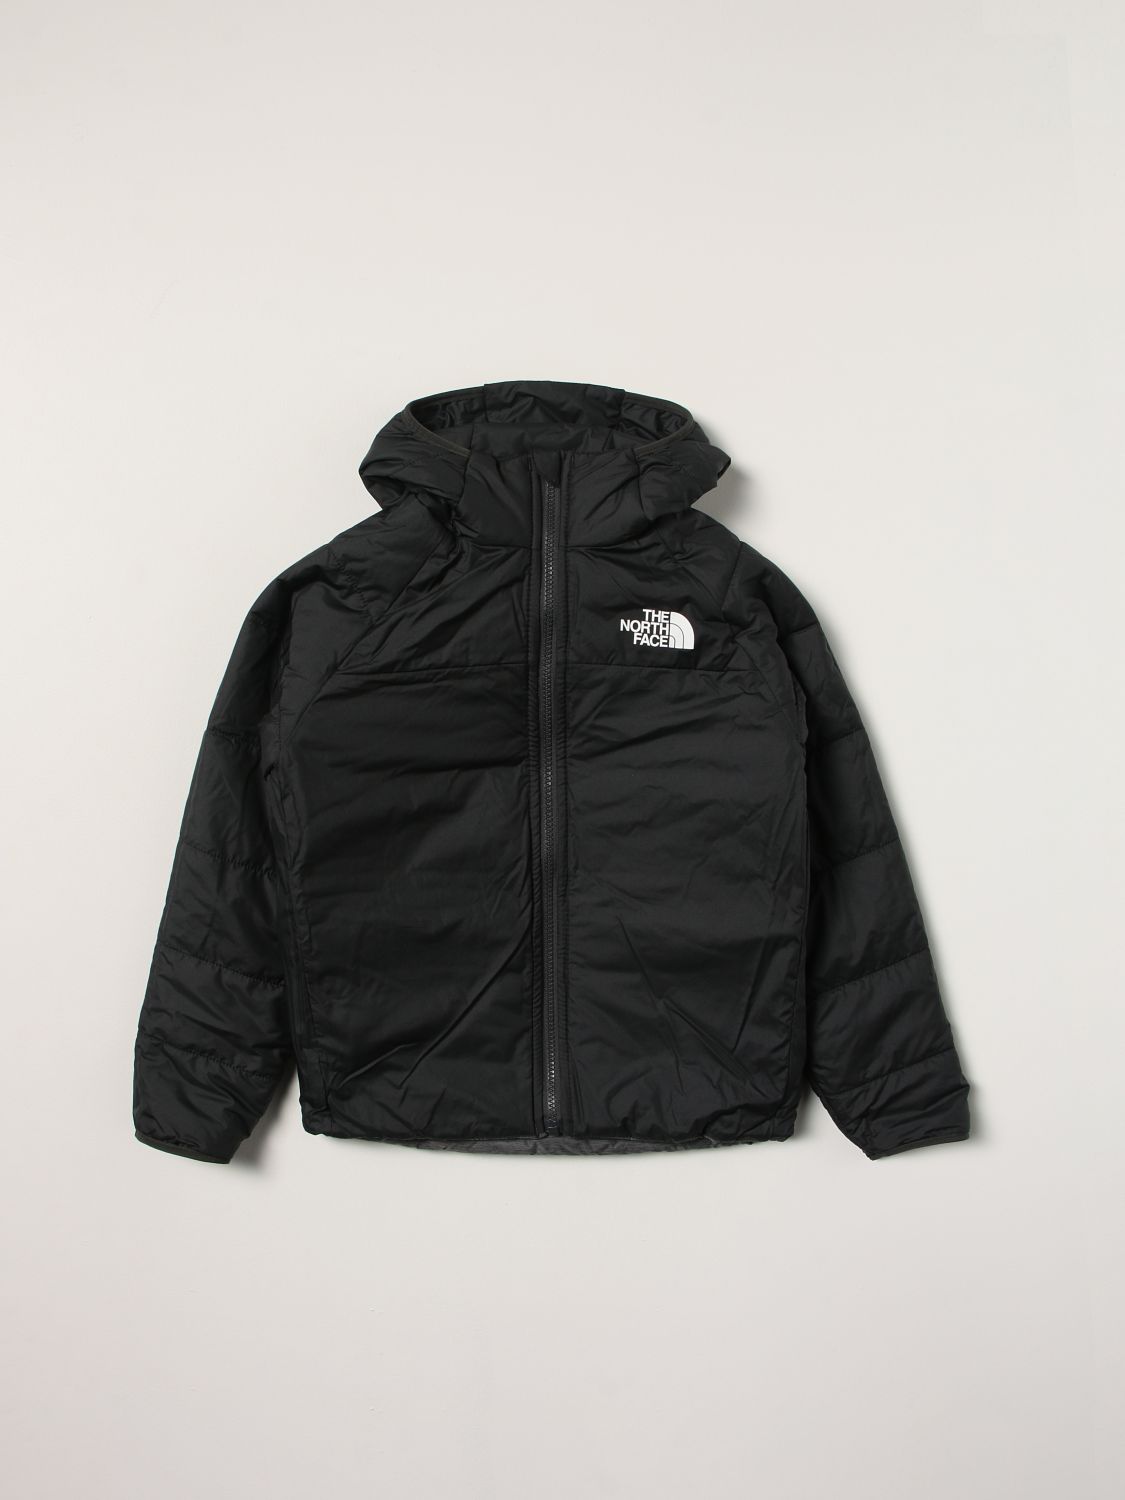 THE NORTH FACE: jacket for boys - Grey | The North Face jacket ...